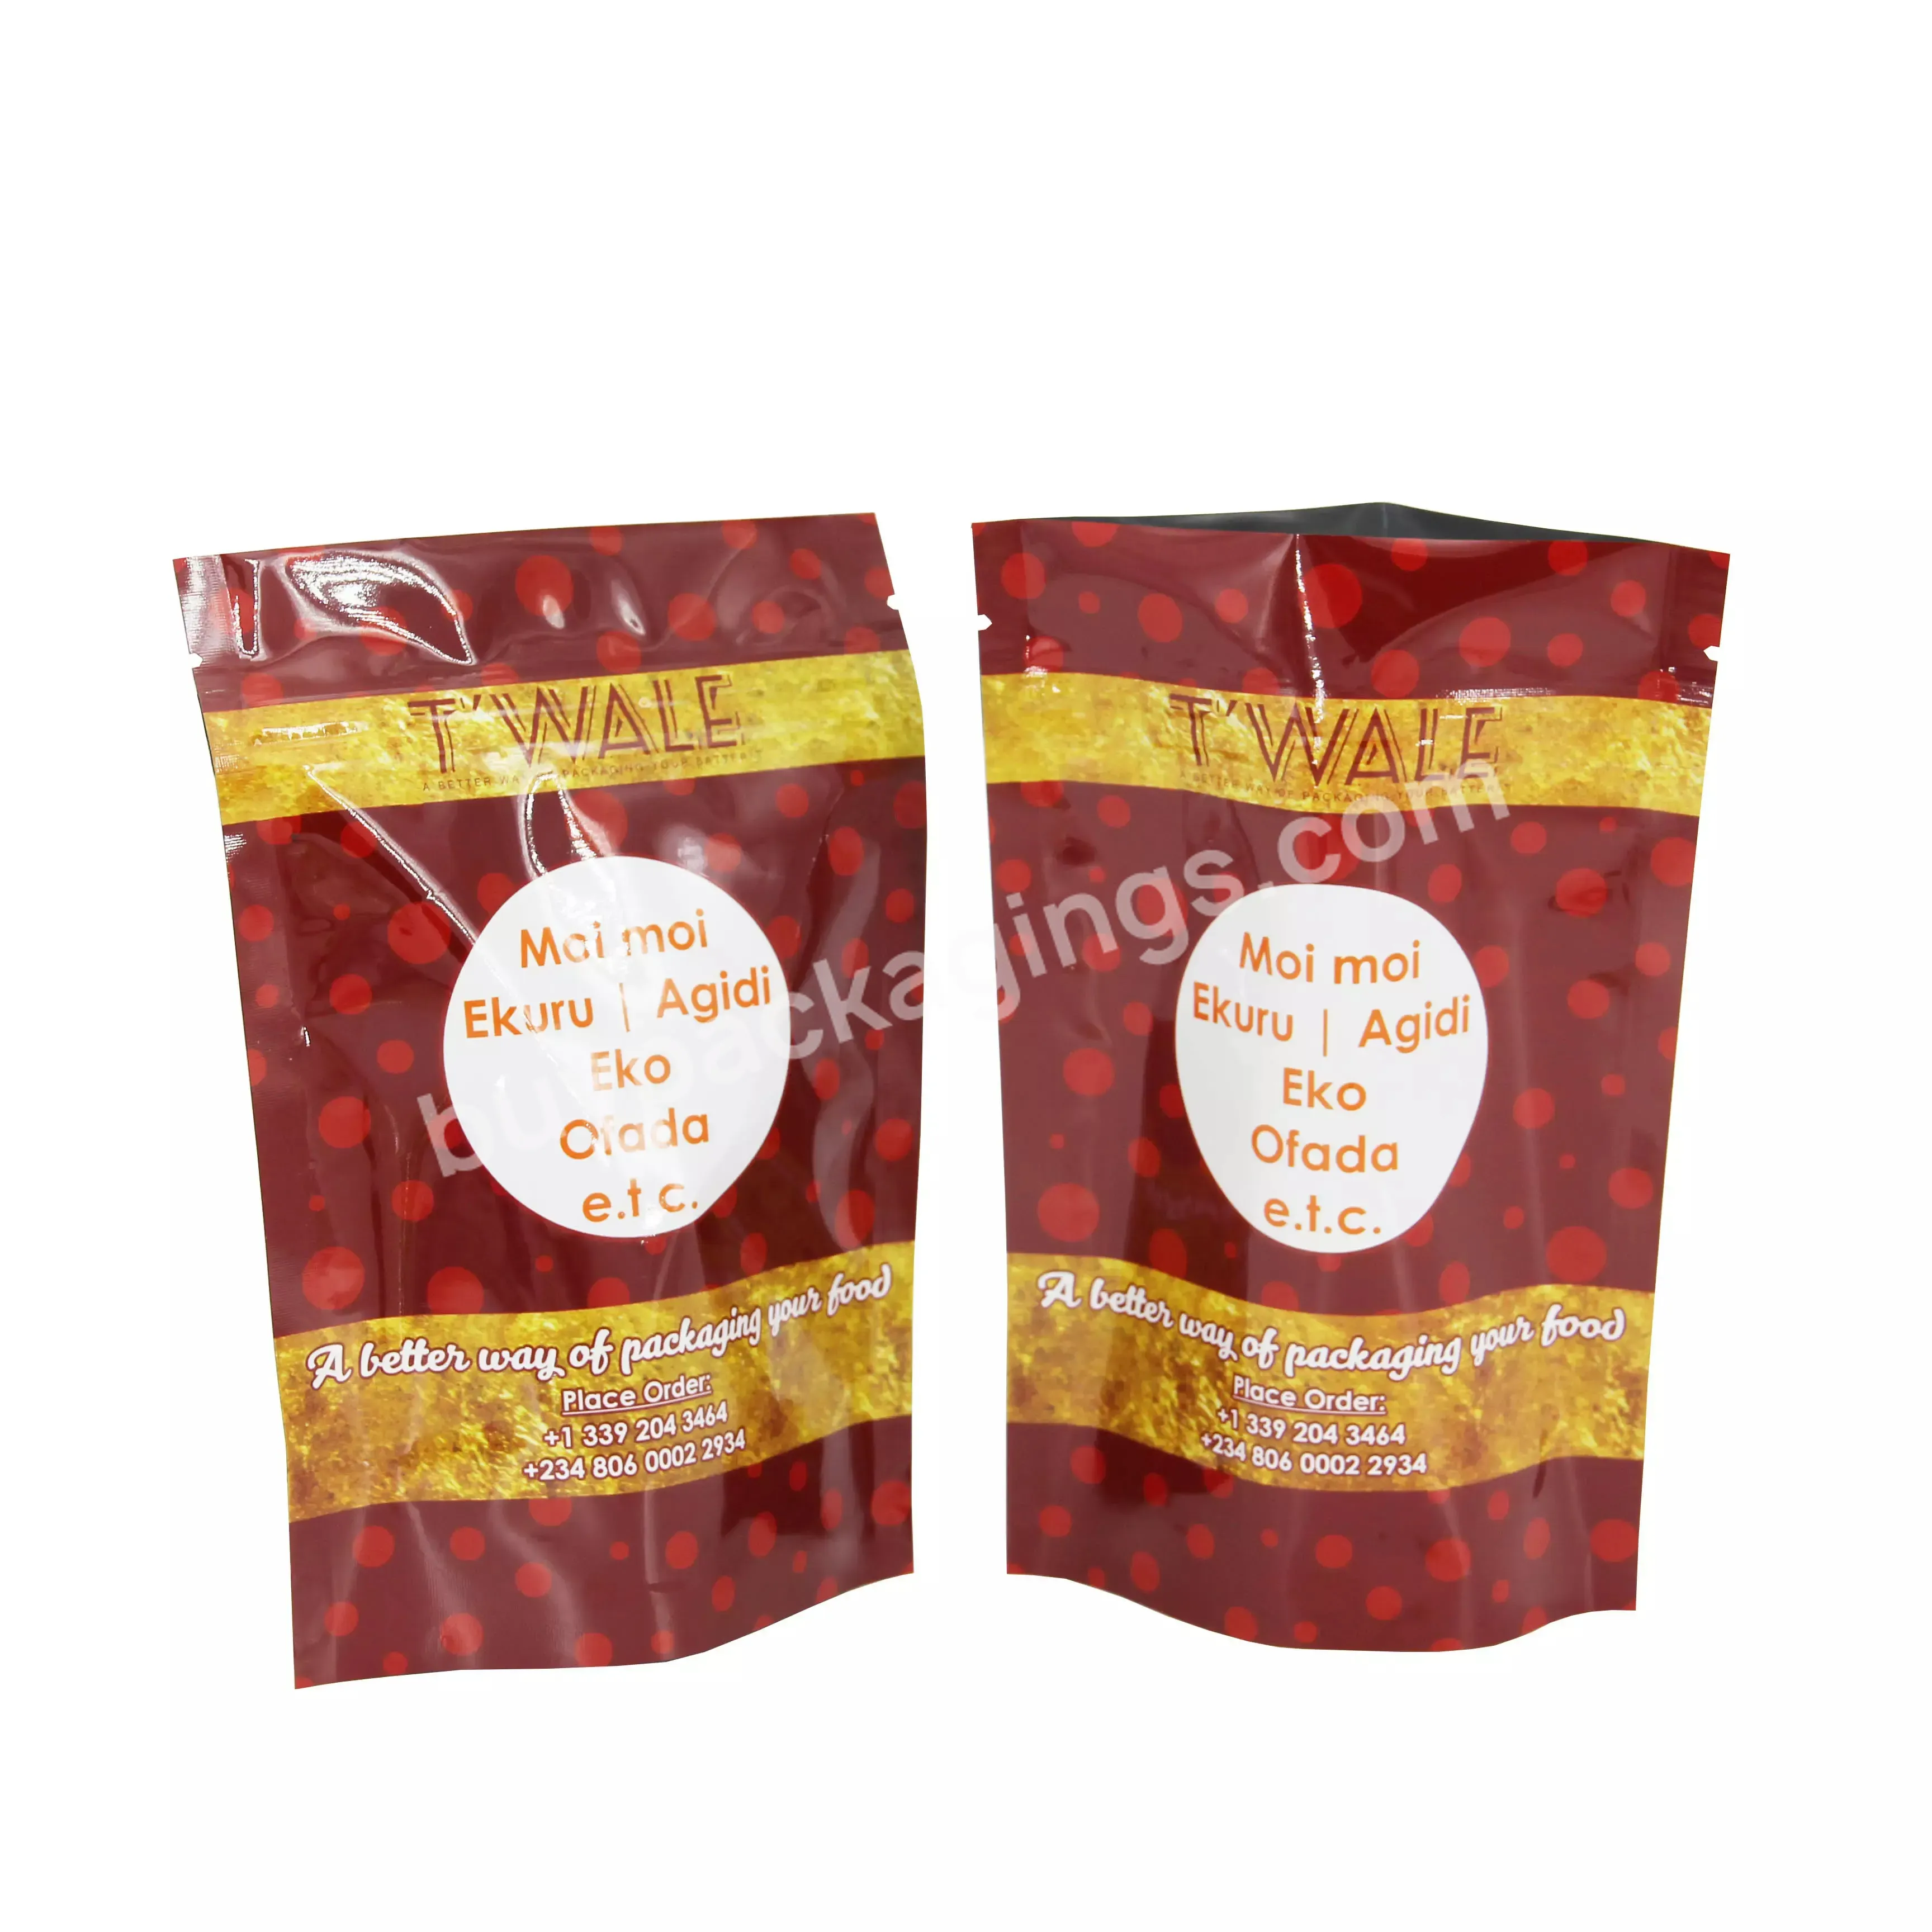 Rich Production Experience Factory Strong Retort Food Zipper Bag Stand Up Moi-moi Cooking Pouch Used In Boiling Water - Buy Moi Moi Cooking Pouch Customise,Jesdit Moi Moi Cooking Pouch Customise,Retort Food Bag Stand Up Moi-moi Cooking Pouch.